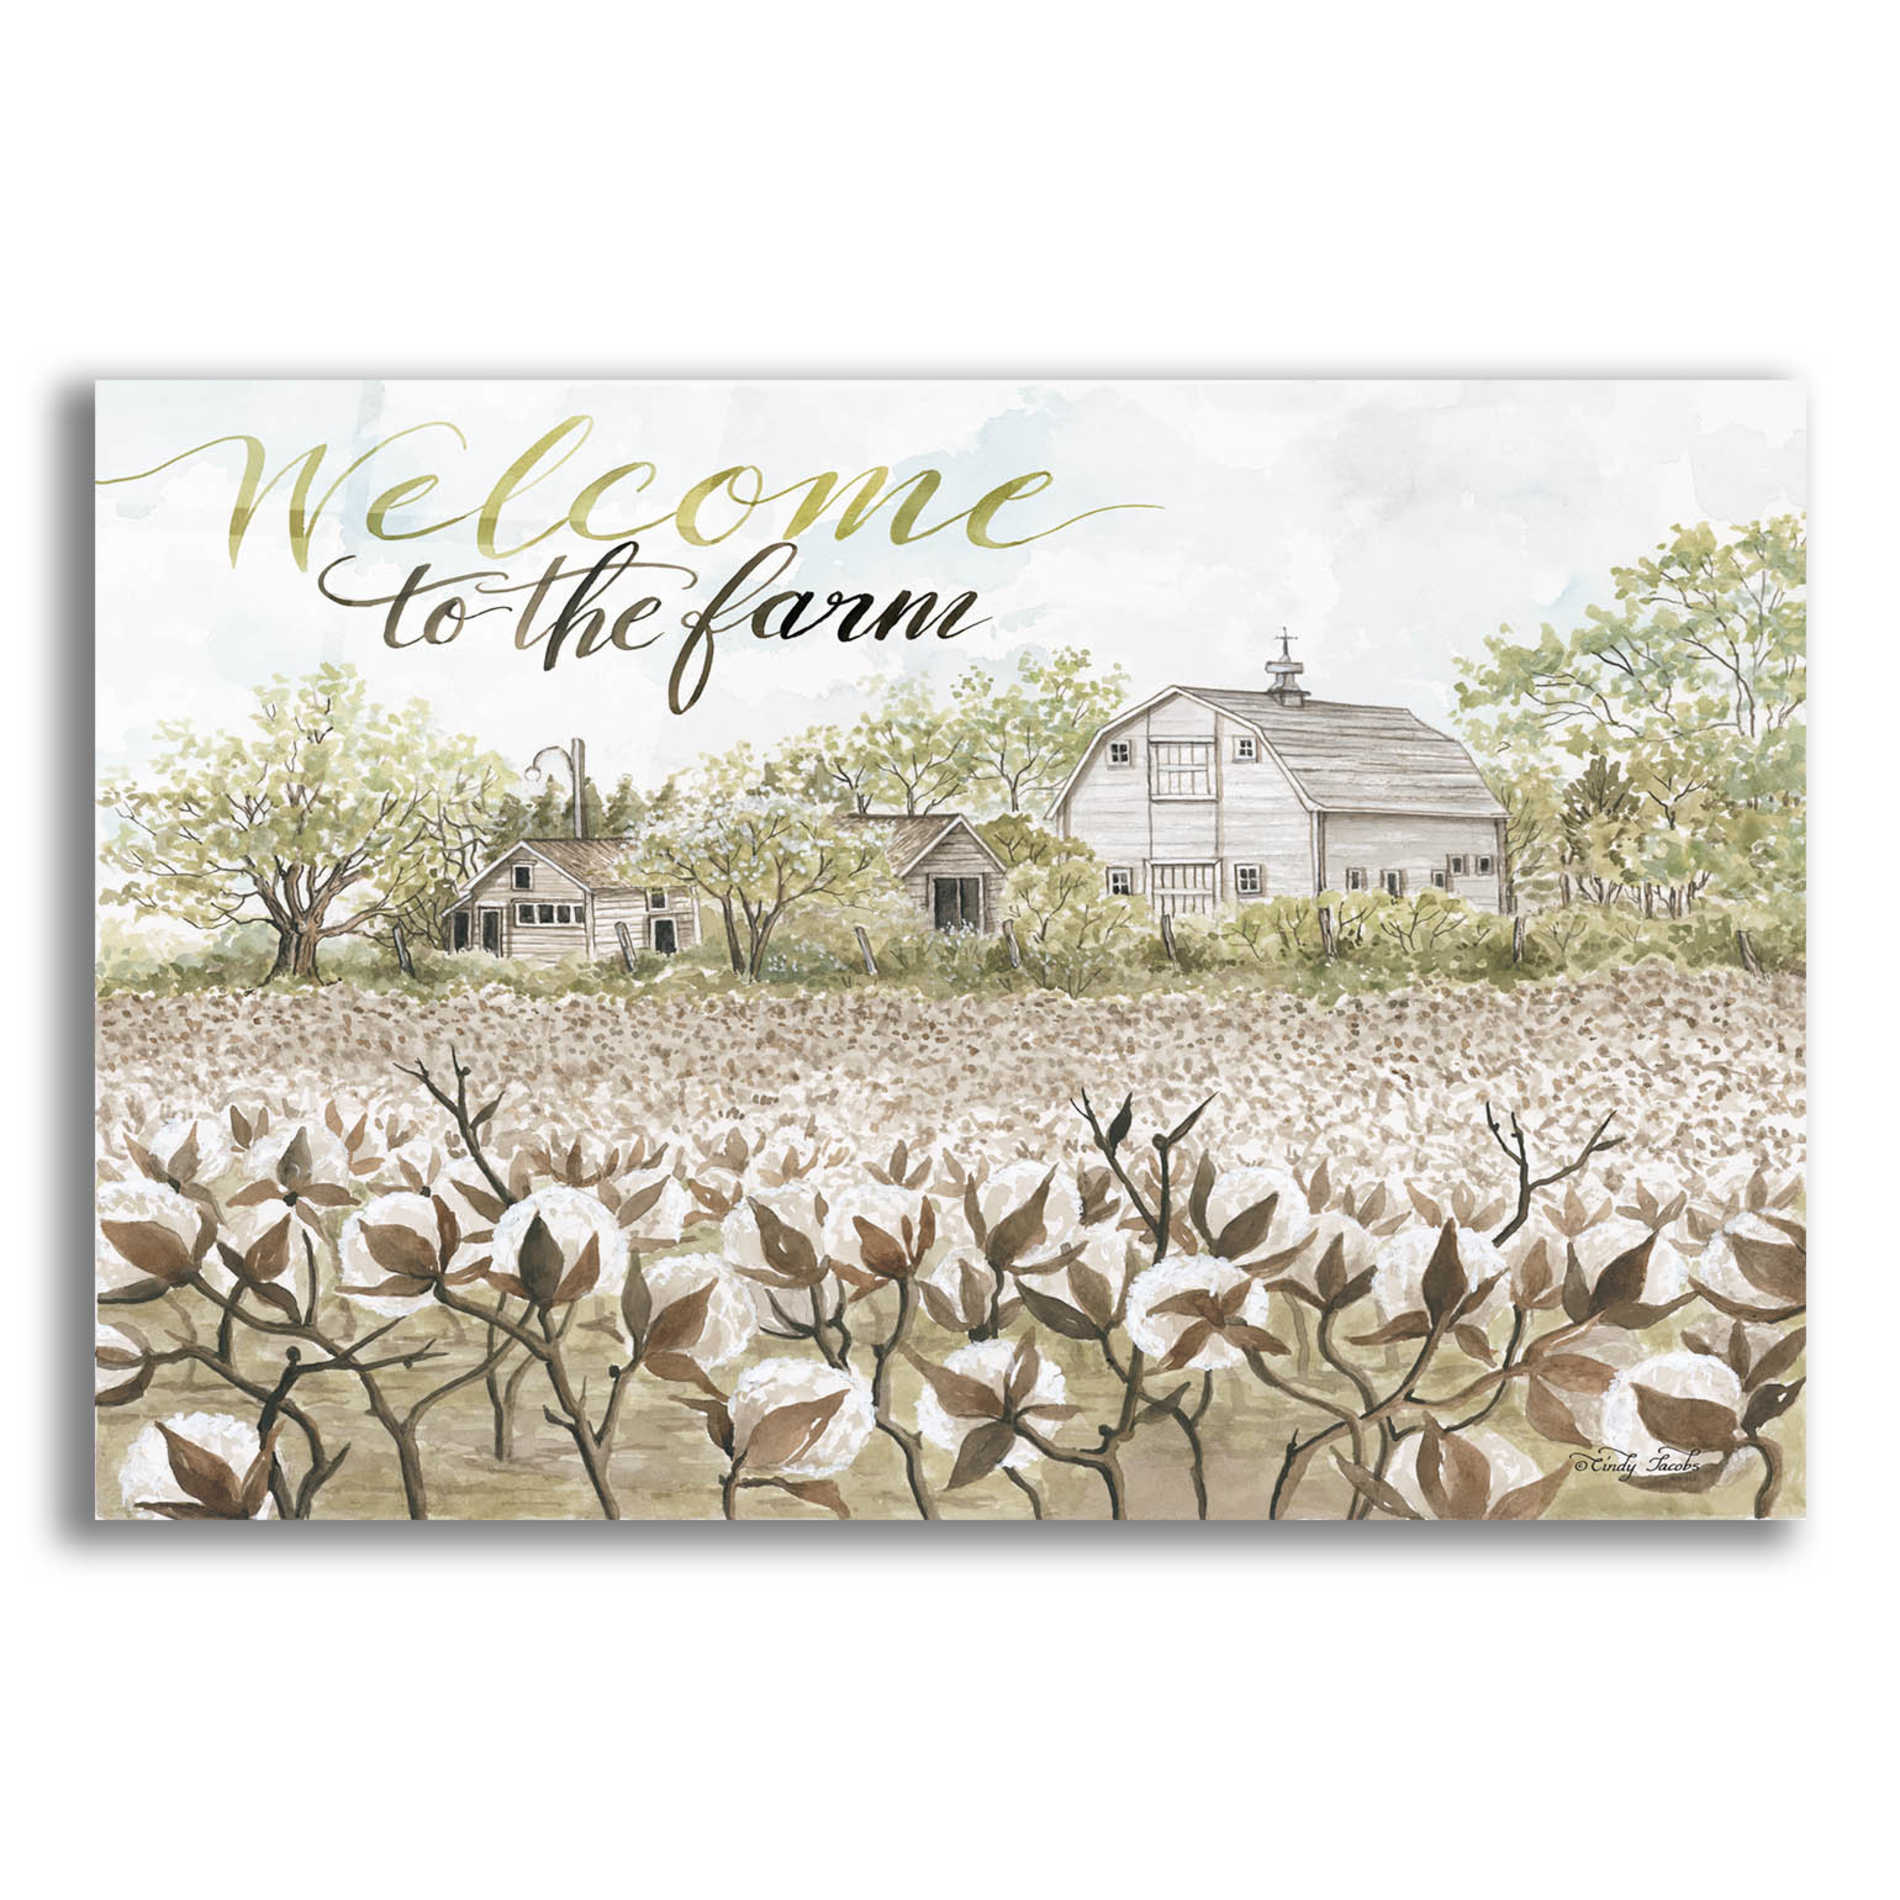 Epic Art 'Welcome to the Farm' by Cindy Jacobs, Acrylic Glass Wall Art,16x12